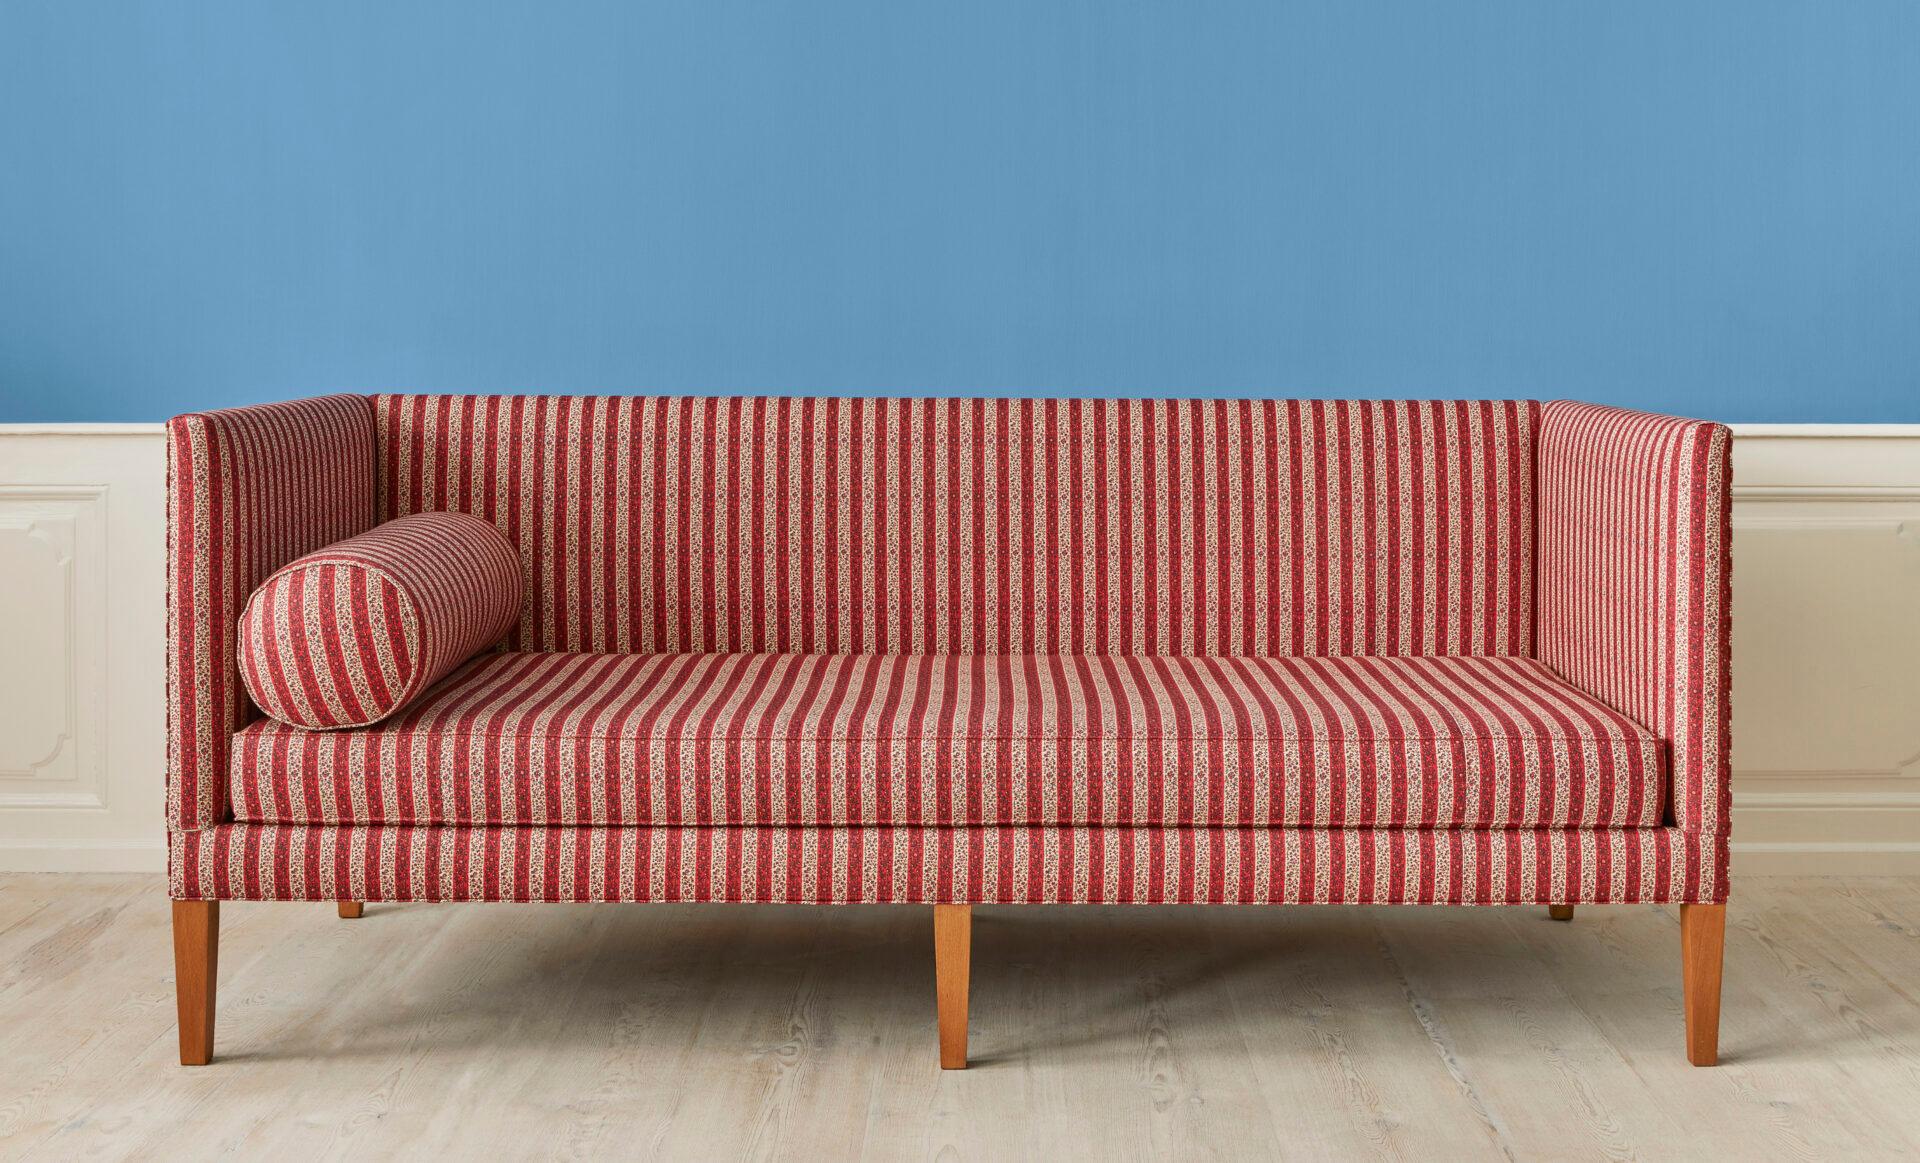 Belgium, Contemporary

Sofa in customized upholstery by The Apartment.

H 88 x W 210 x D 88, seat H 46 cm.